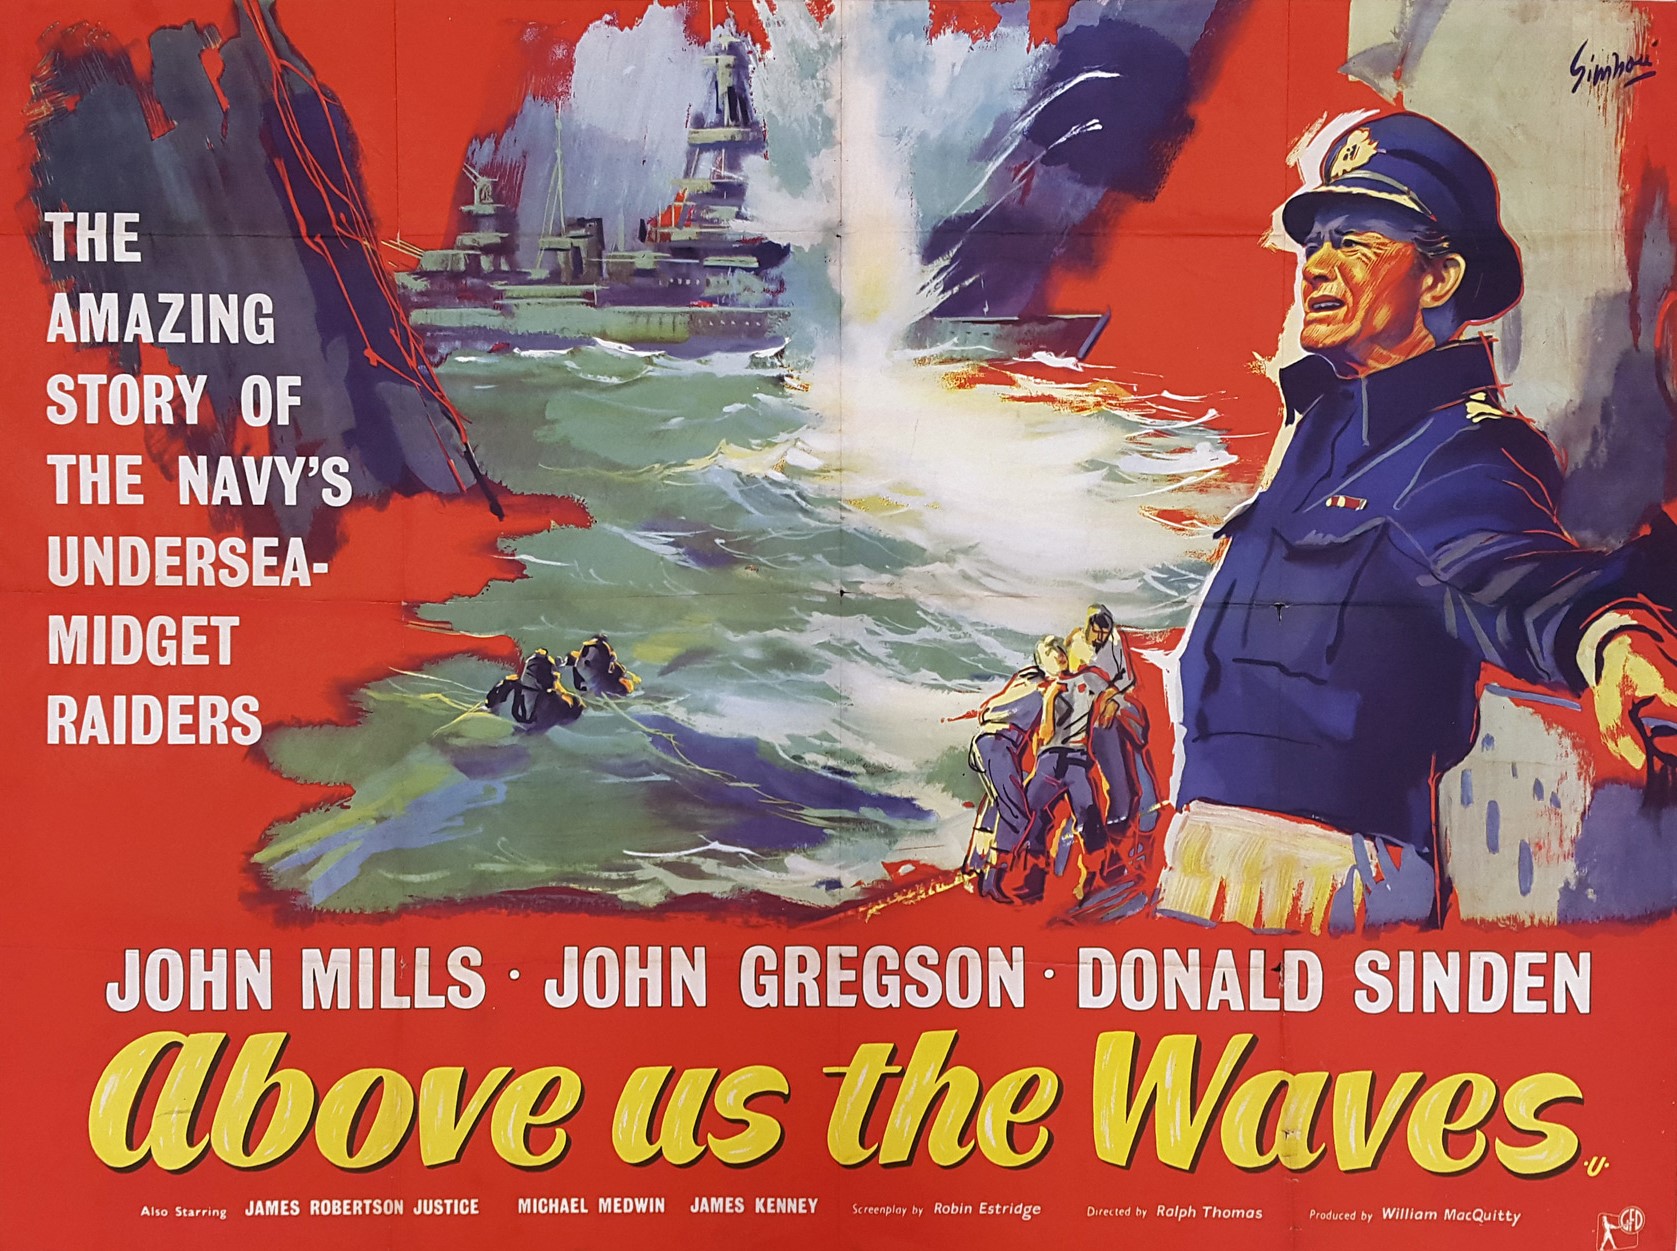 Theatrical poster for the film 'Above us the Waves'